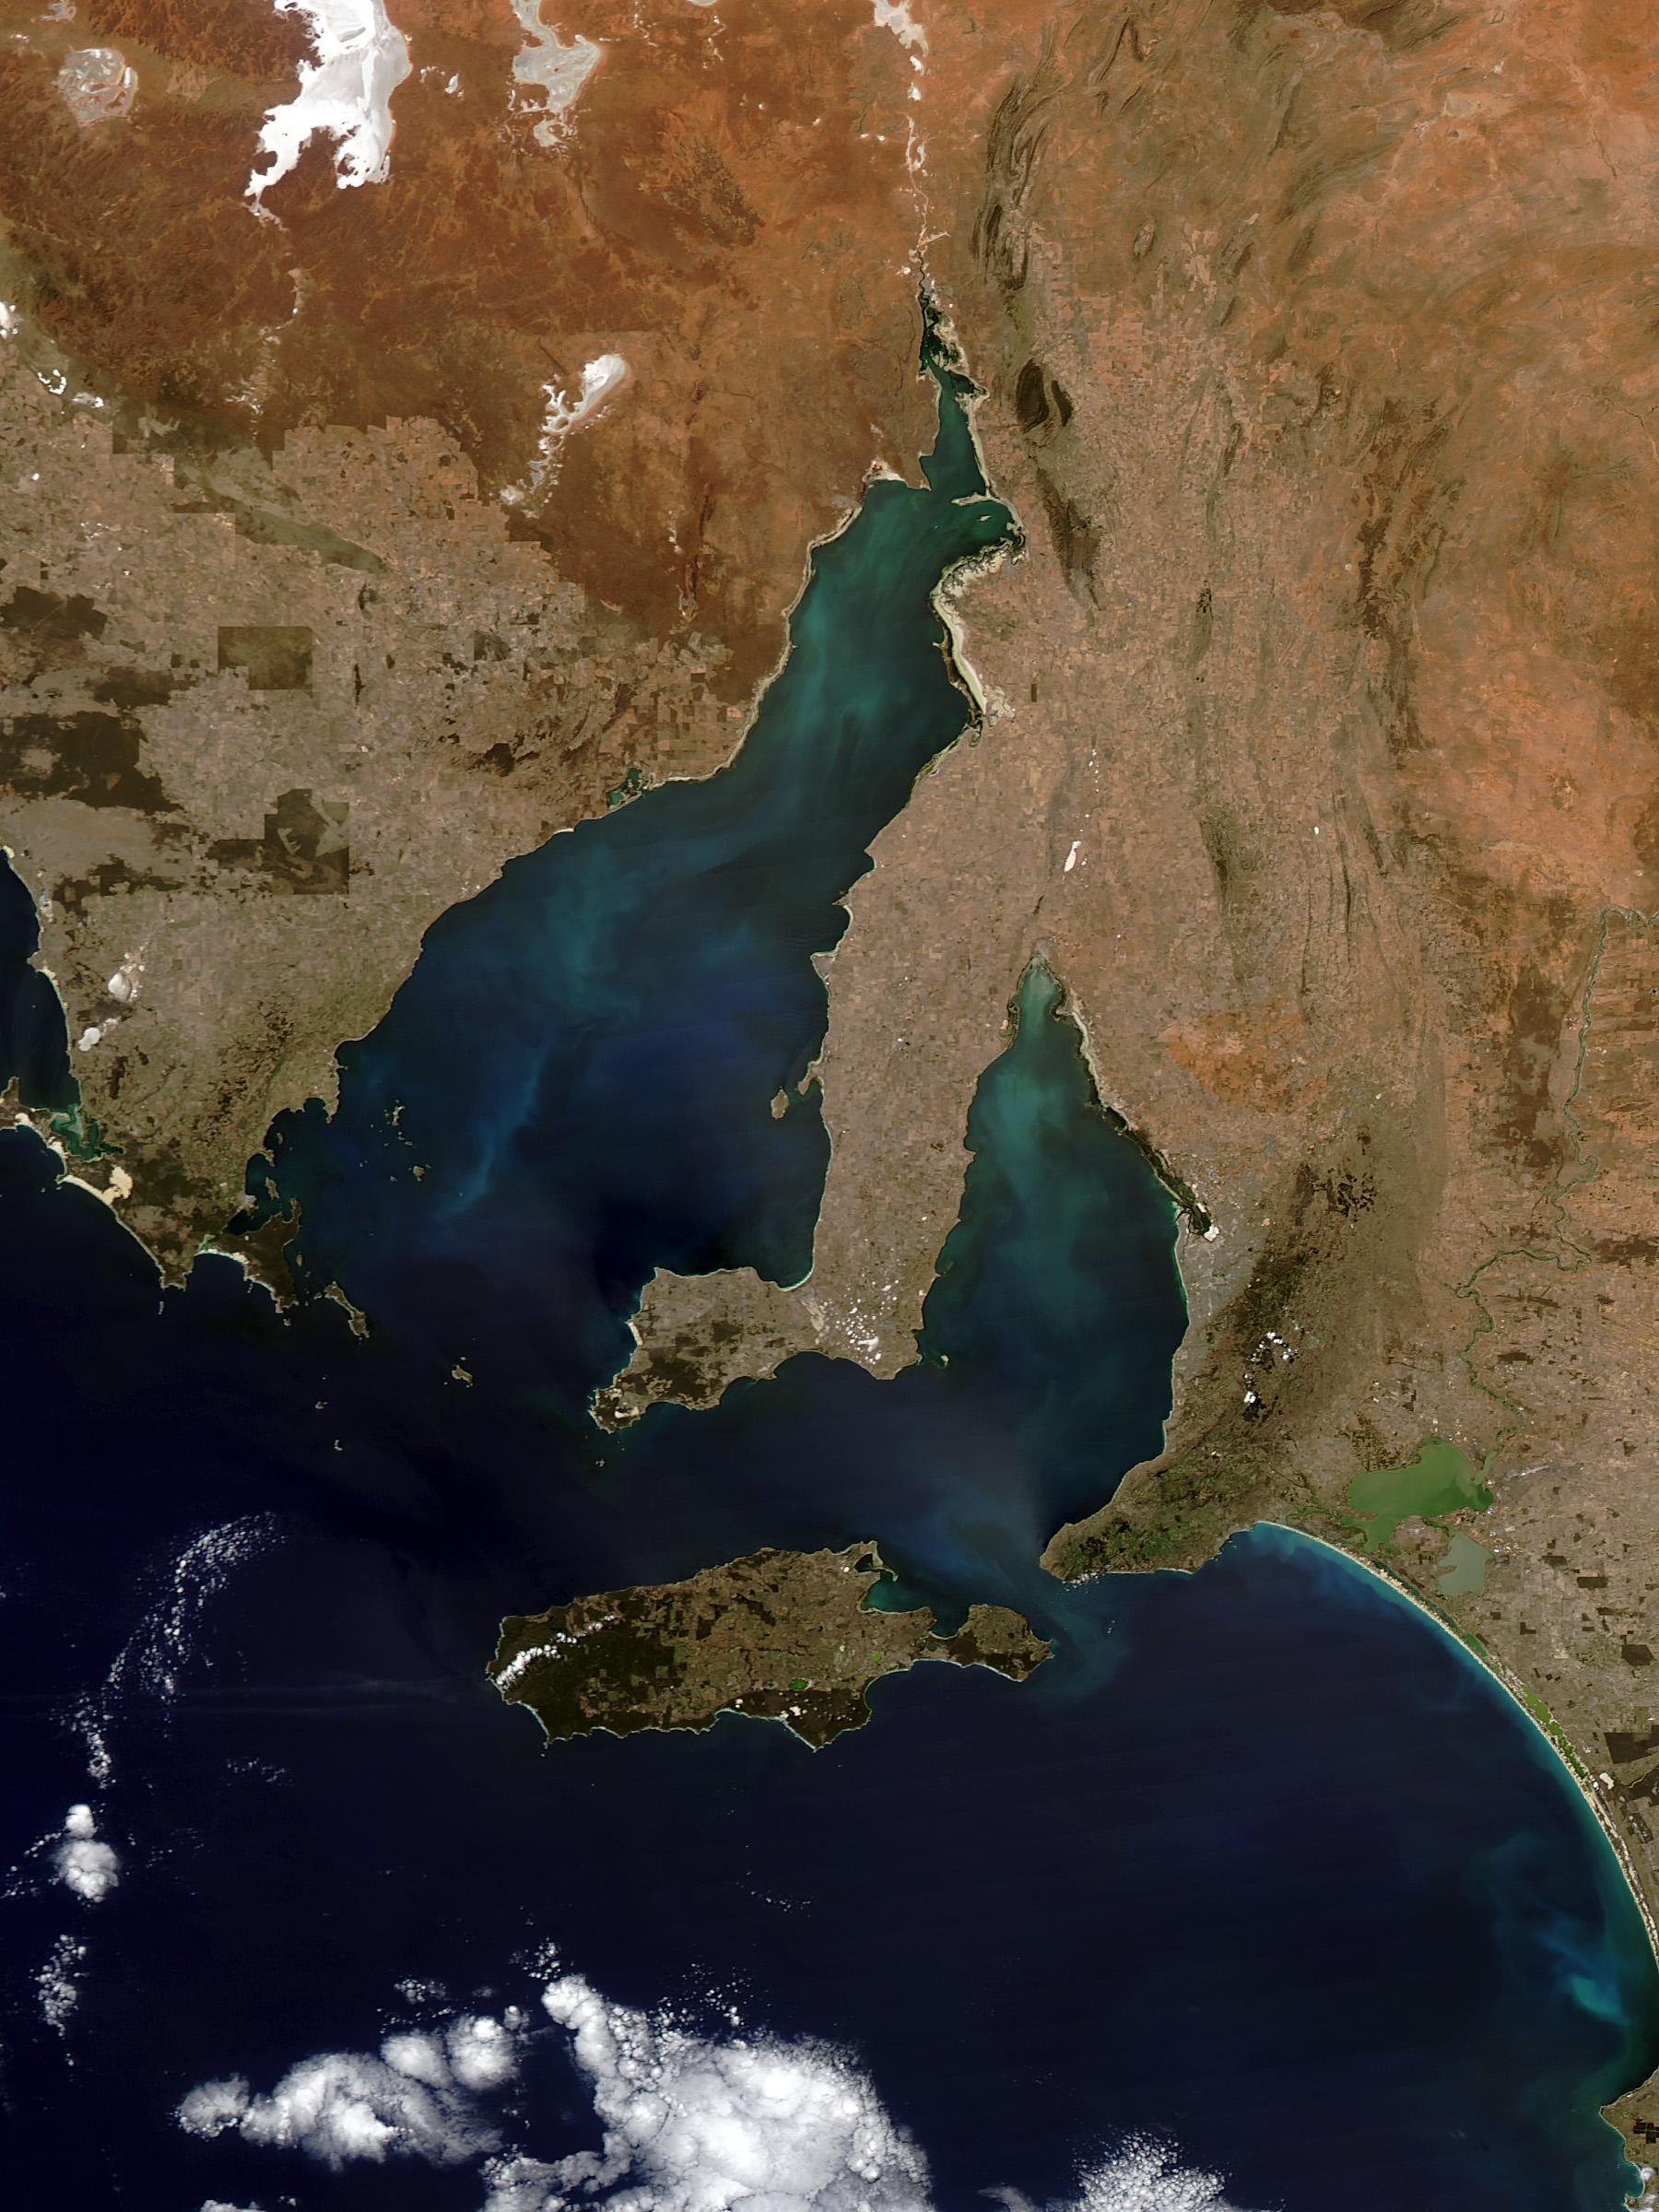 Colorful blue-green water off the coast of South Australia. The striking colors could be due to sediment brought to the surface when strong winds churn shallow waters. Courtesy: NASA